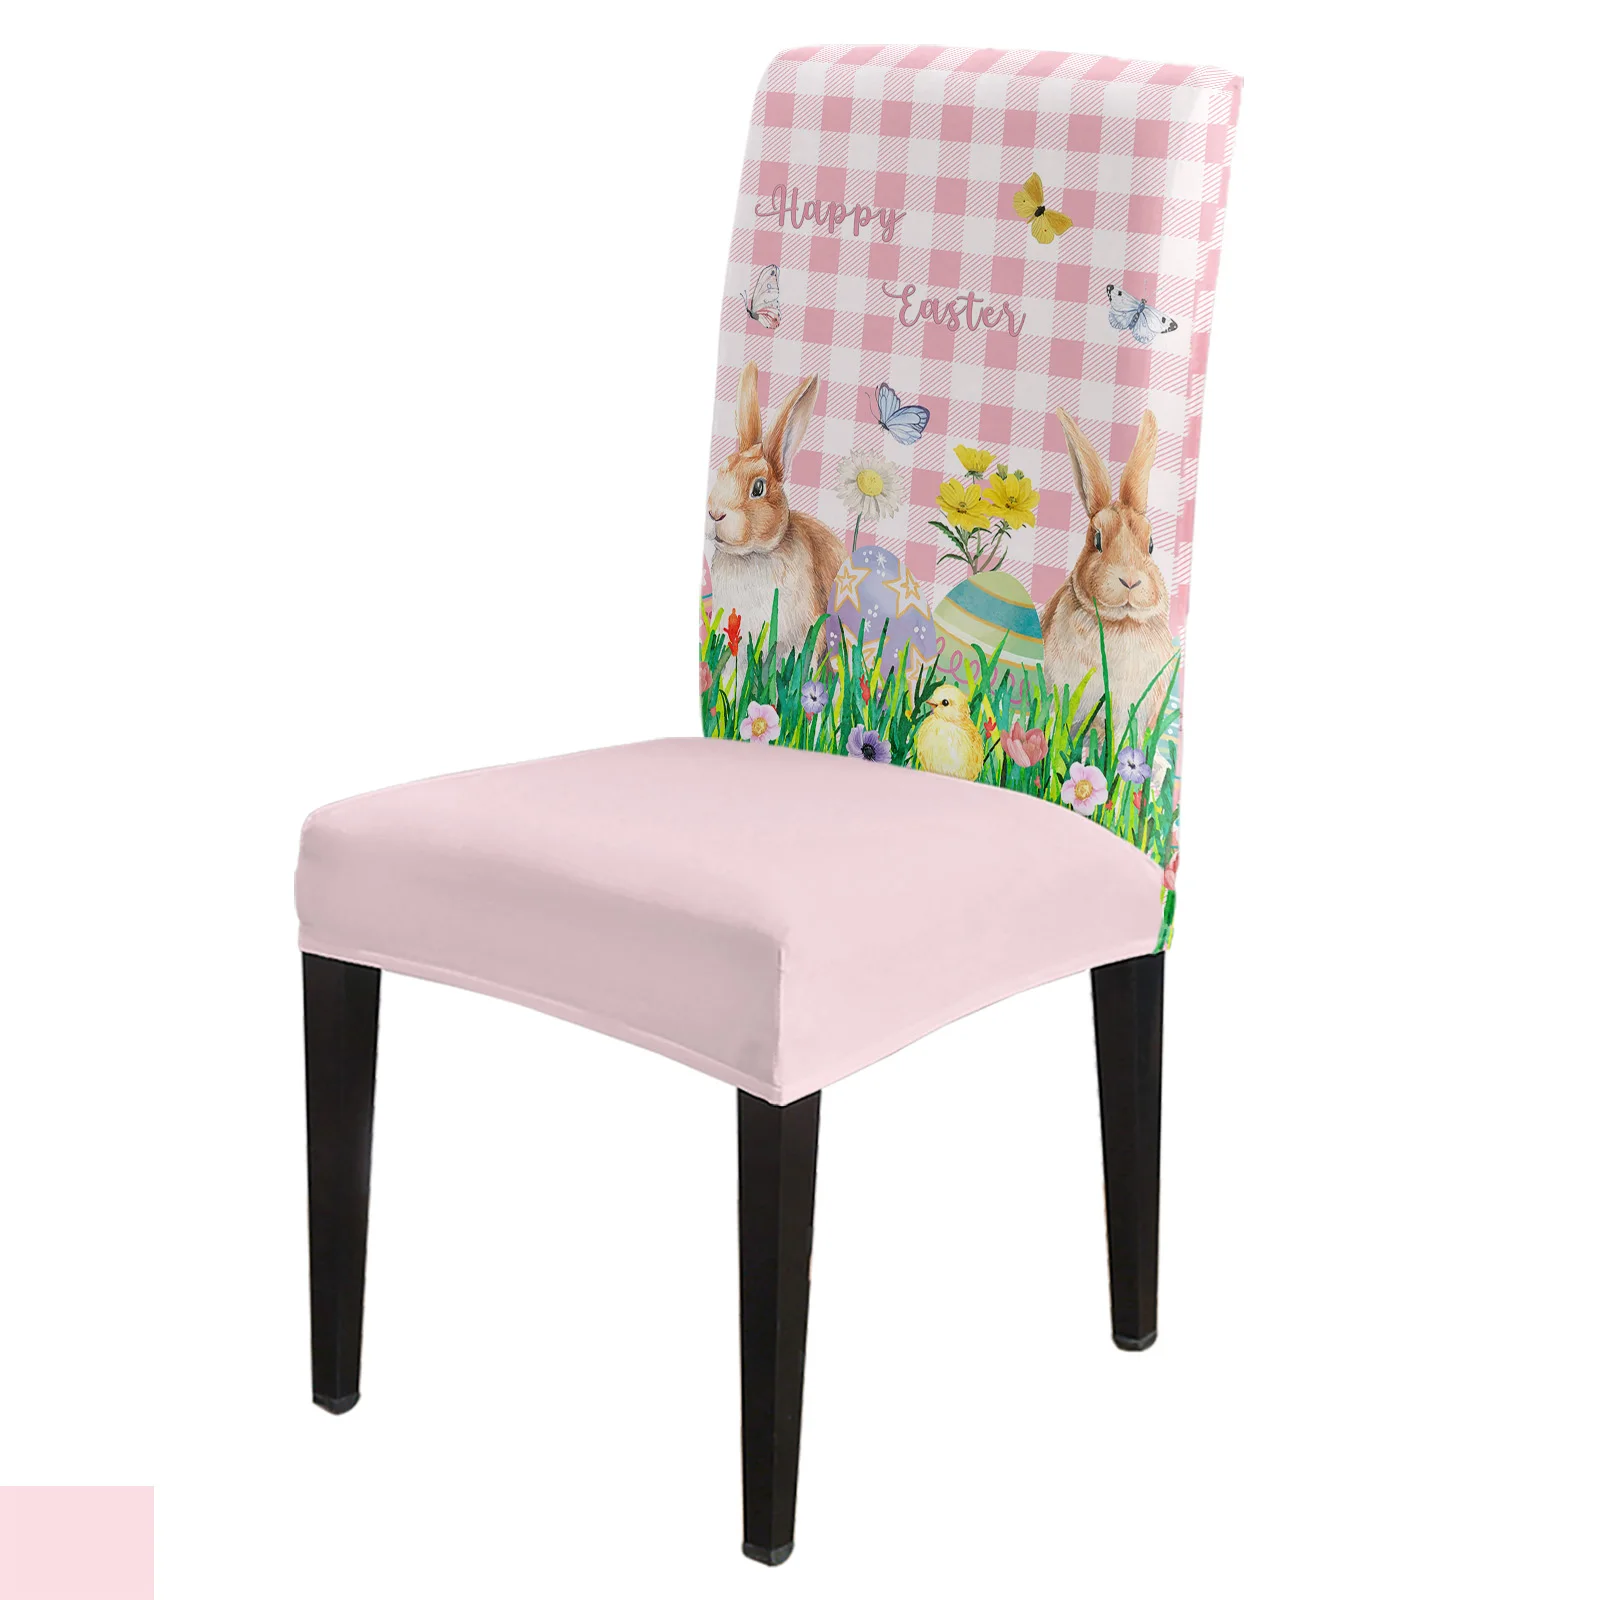 

Easter Bunny Egg Flower Wood Grain Chair Cover Dining Spandex Stretch Seat Covers Home Office Decor Desk Chair Case Set